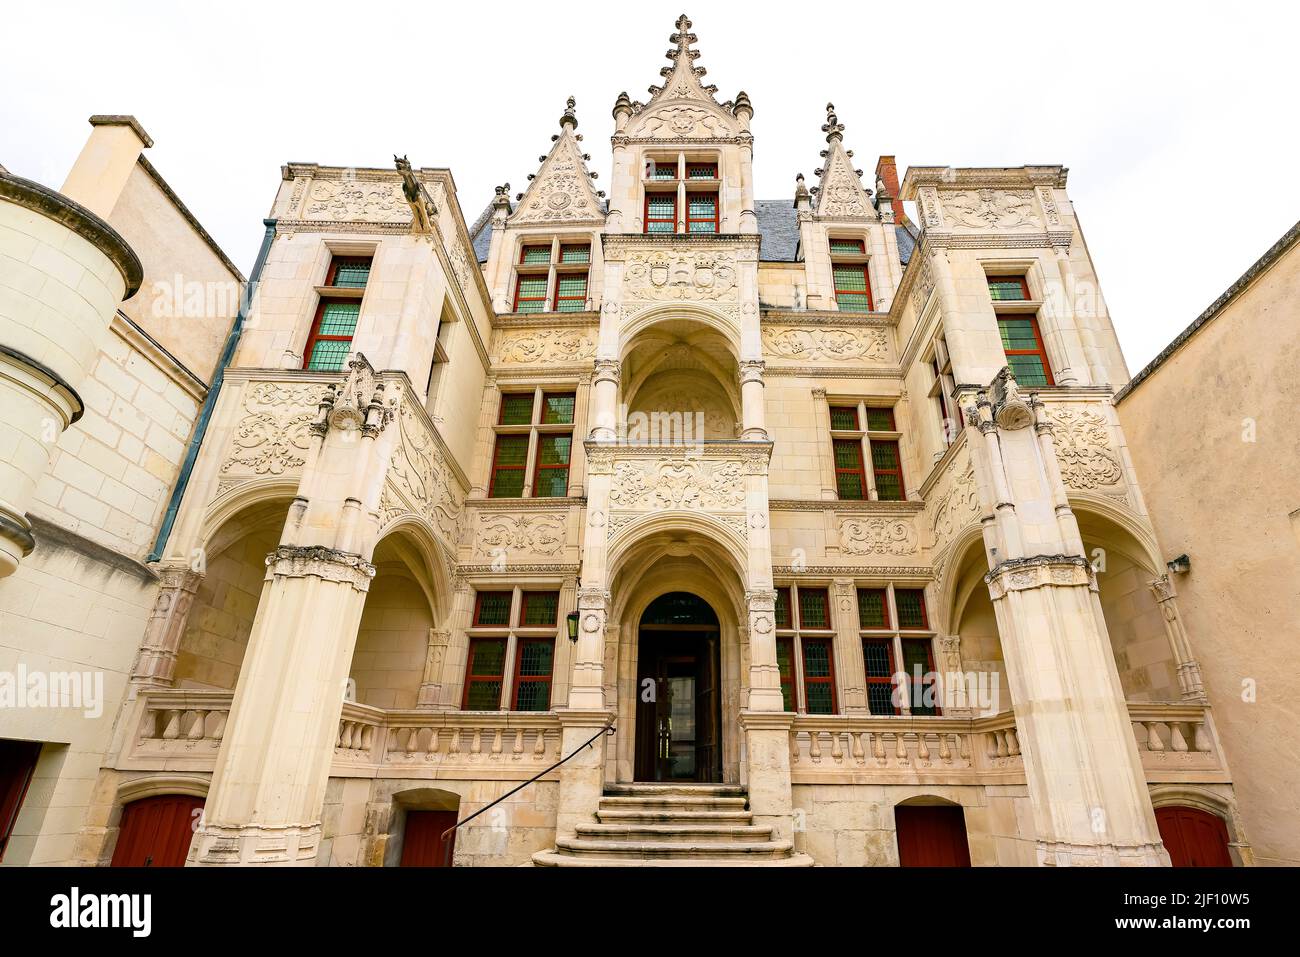 Hotel Goüin in Tours old town. Indre-et-Loire department of the Centre region (the Loire Valley) France. The mansion was built in the 15th century. Th Stock Photo